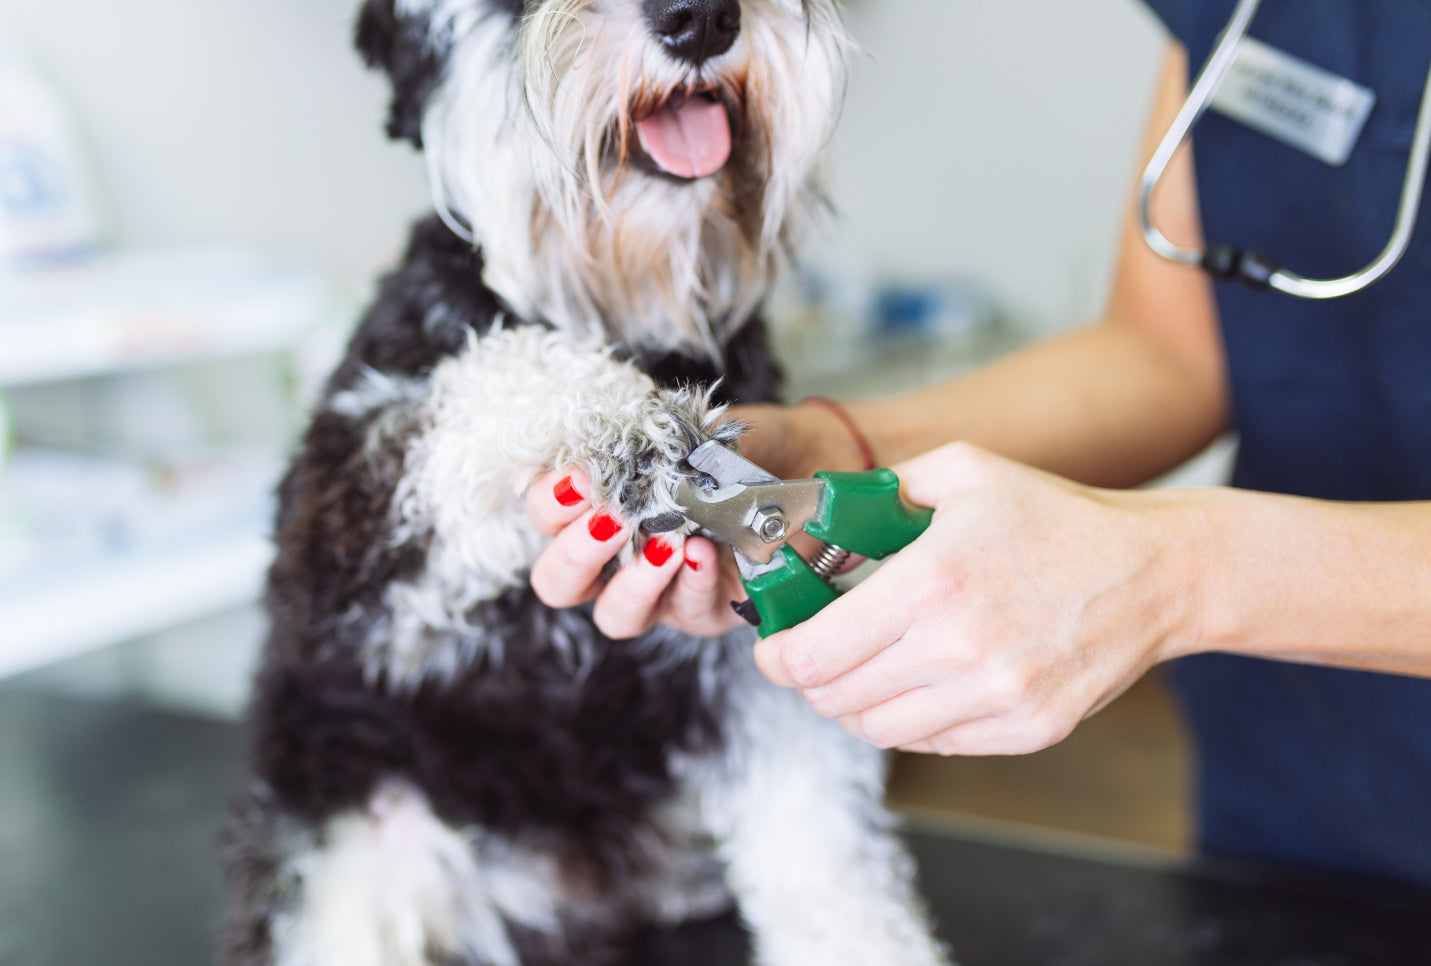 How to Clip Dog Nails: A Step-by-Step Guide